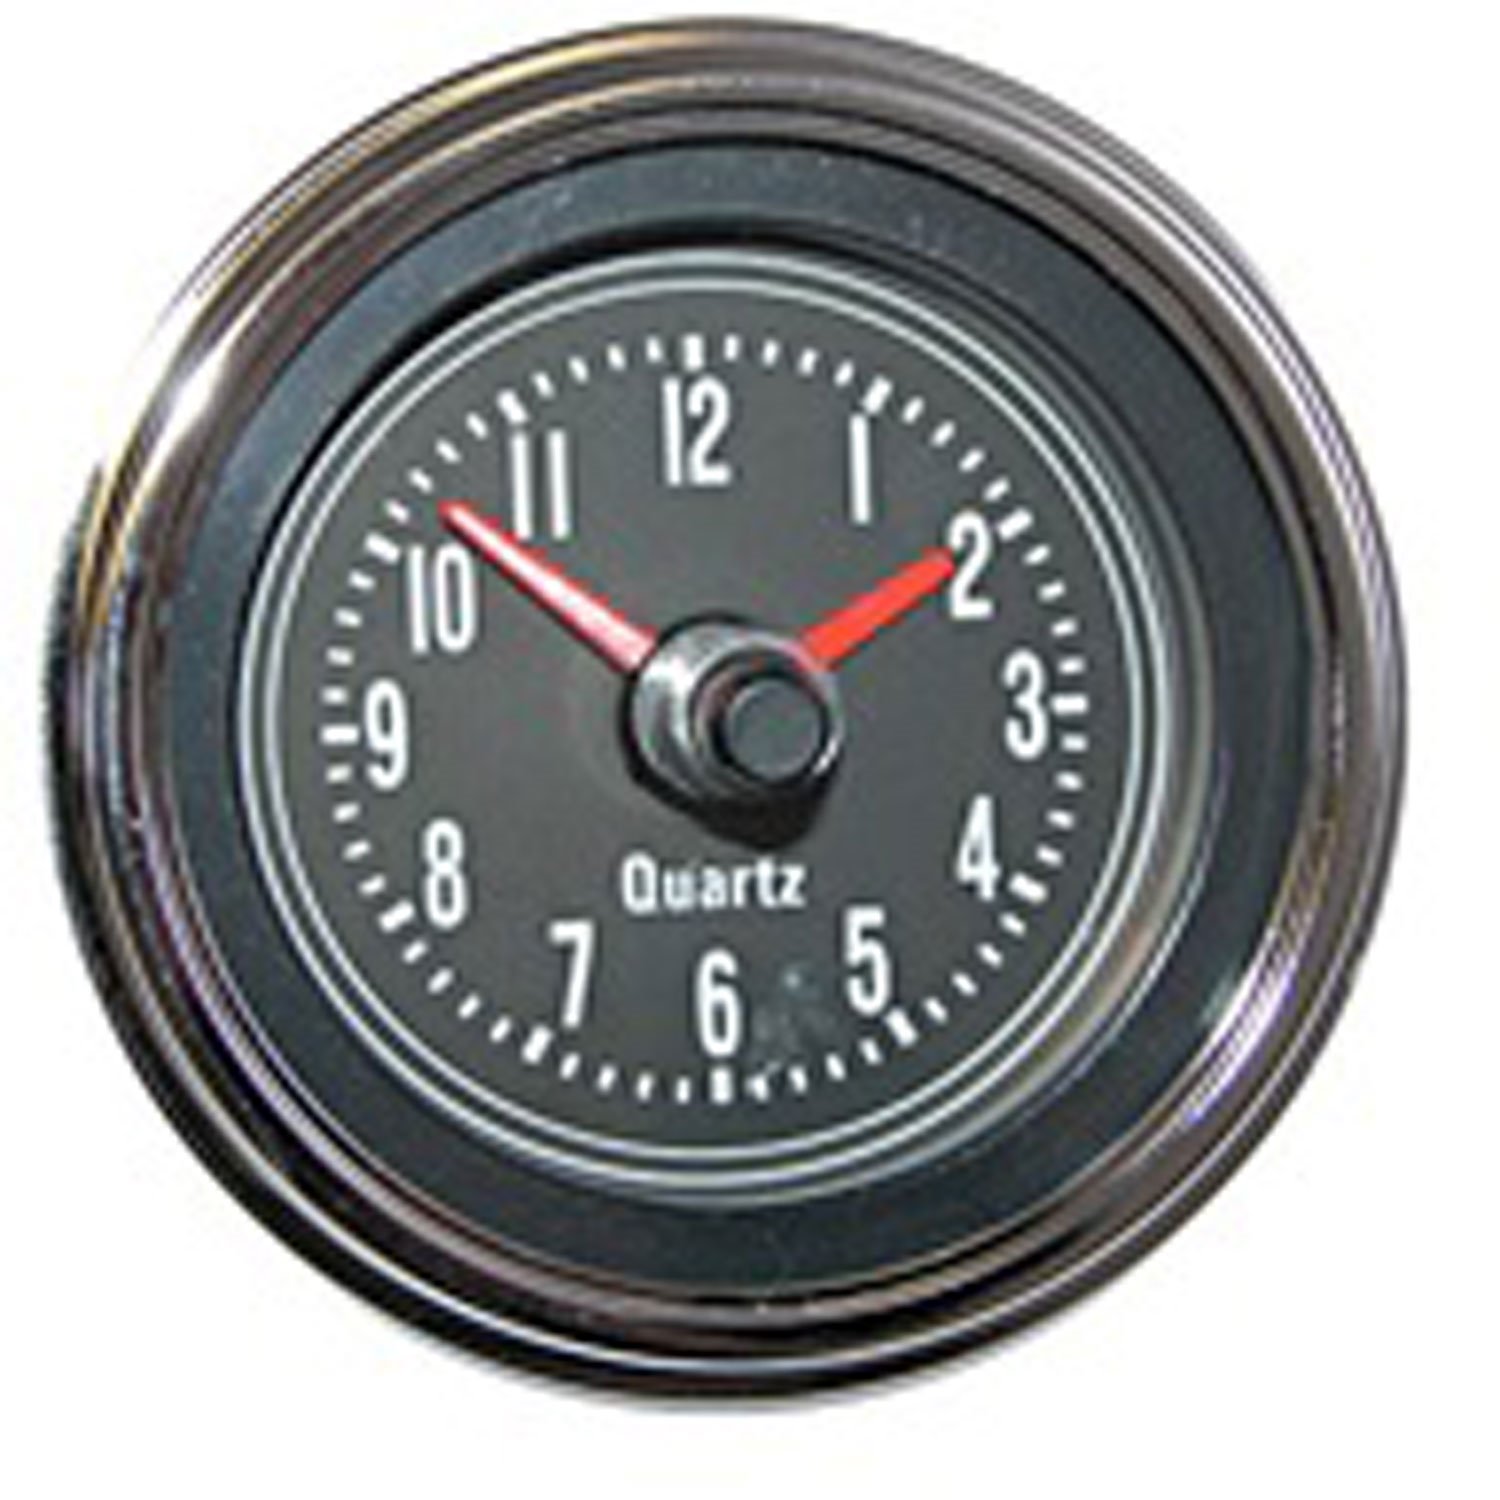 Factory-style replacement dash clock from Omix-ADA, Fits 76-86 Jeep CJ7 and 81-86 Jeep CJ8